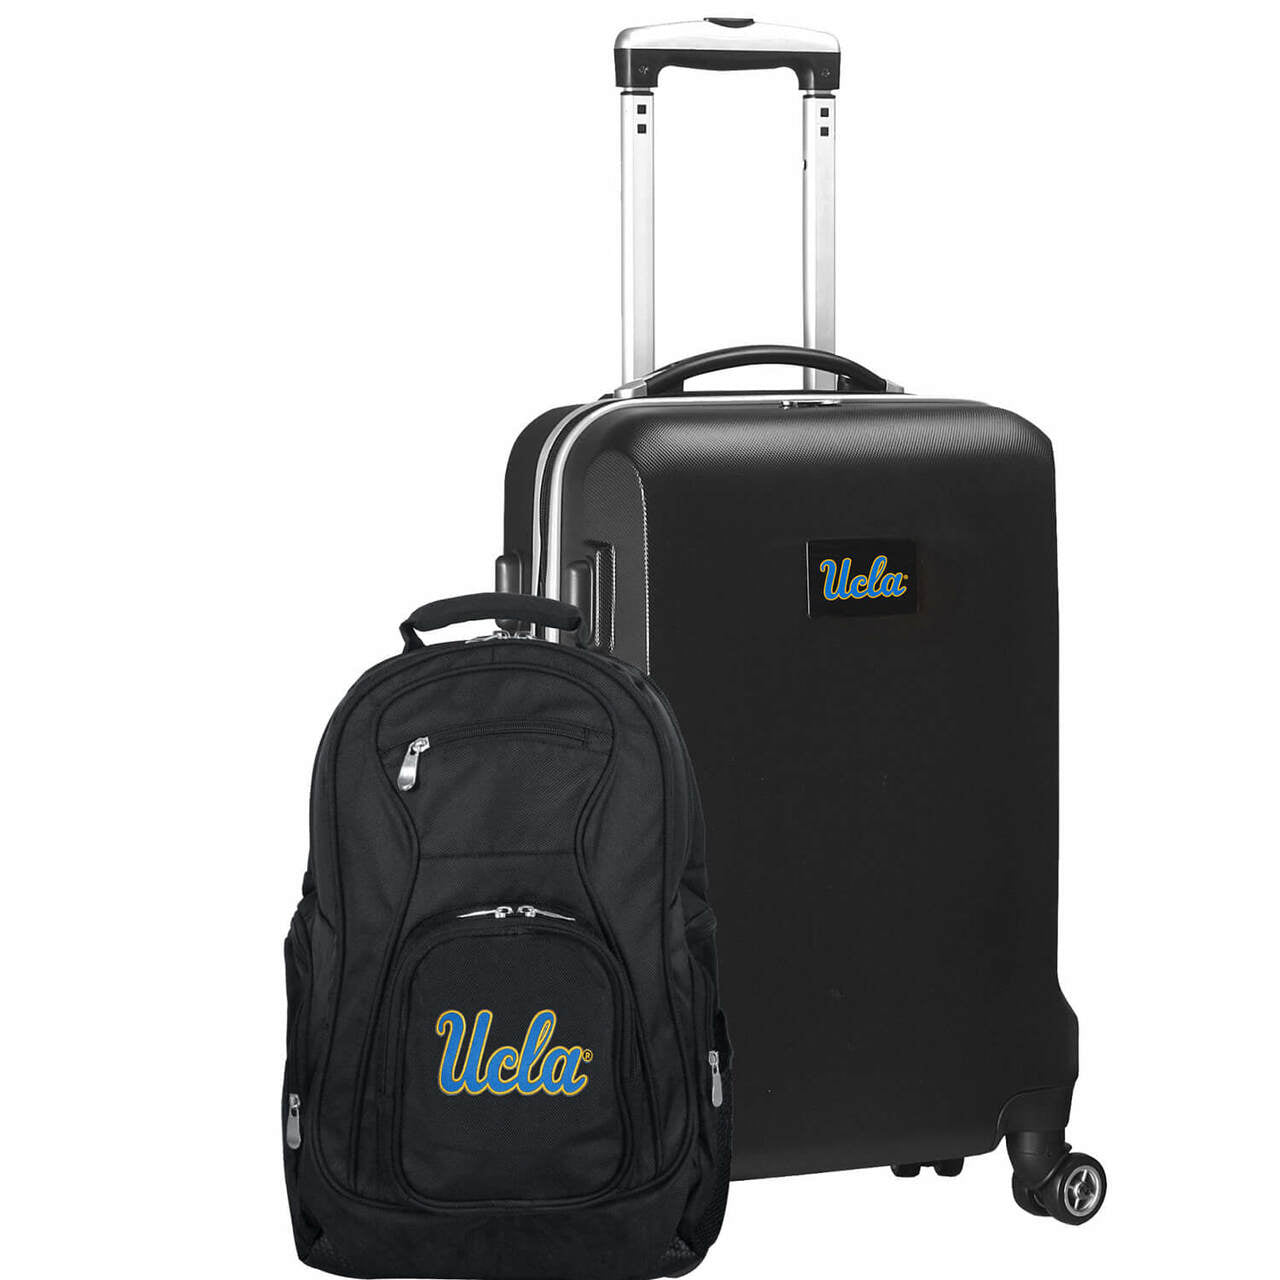 UCLA Bruins Deluxe 2-Piece Backpack and Carry-on Set in Black